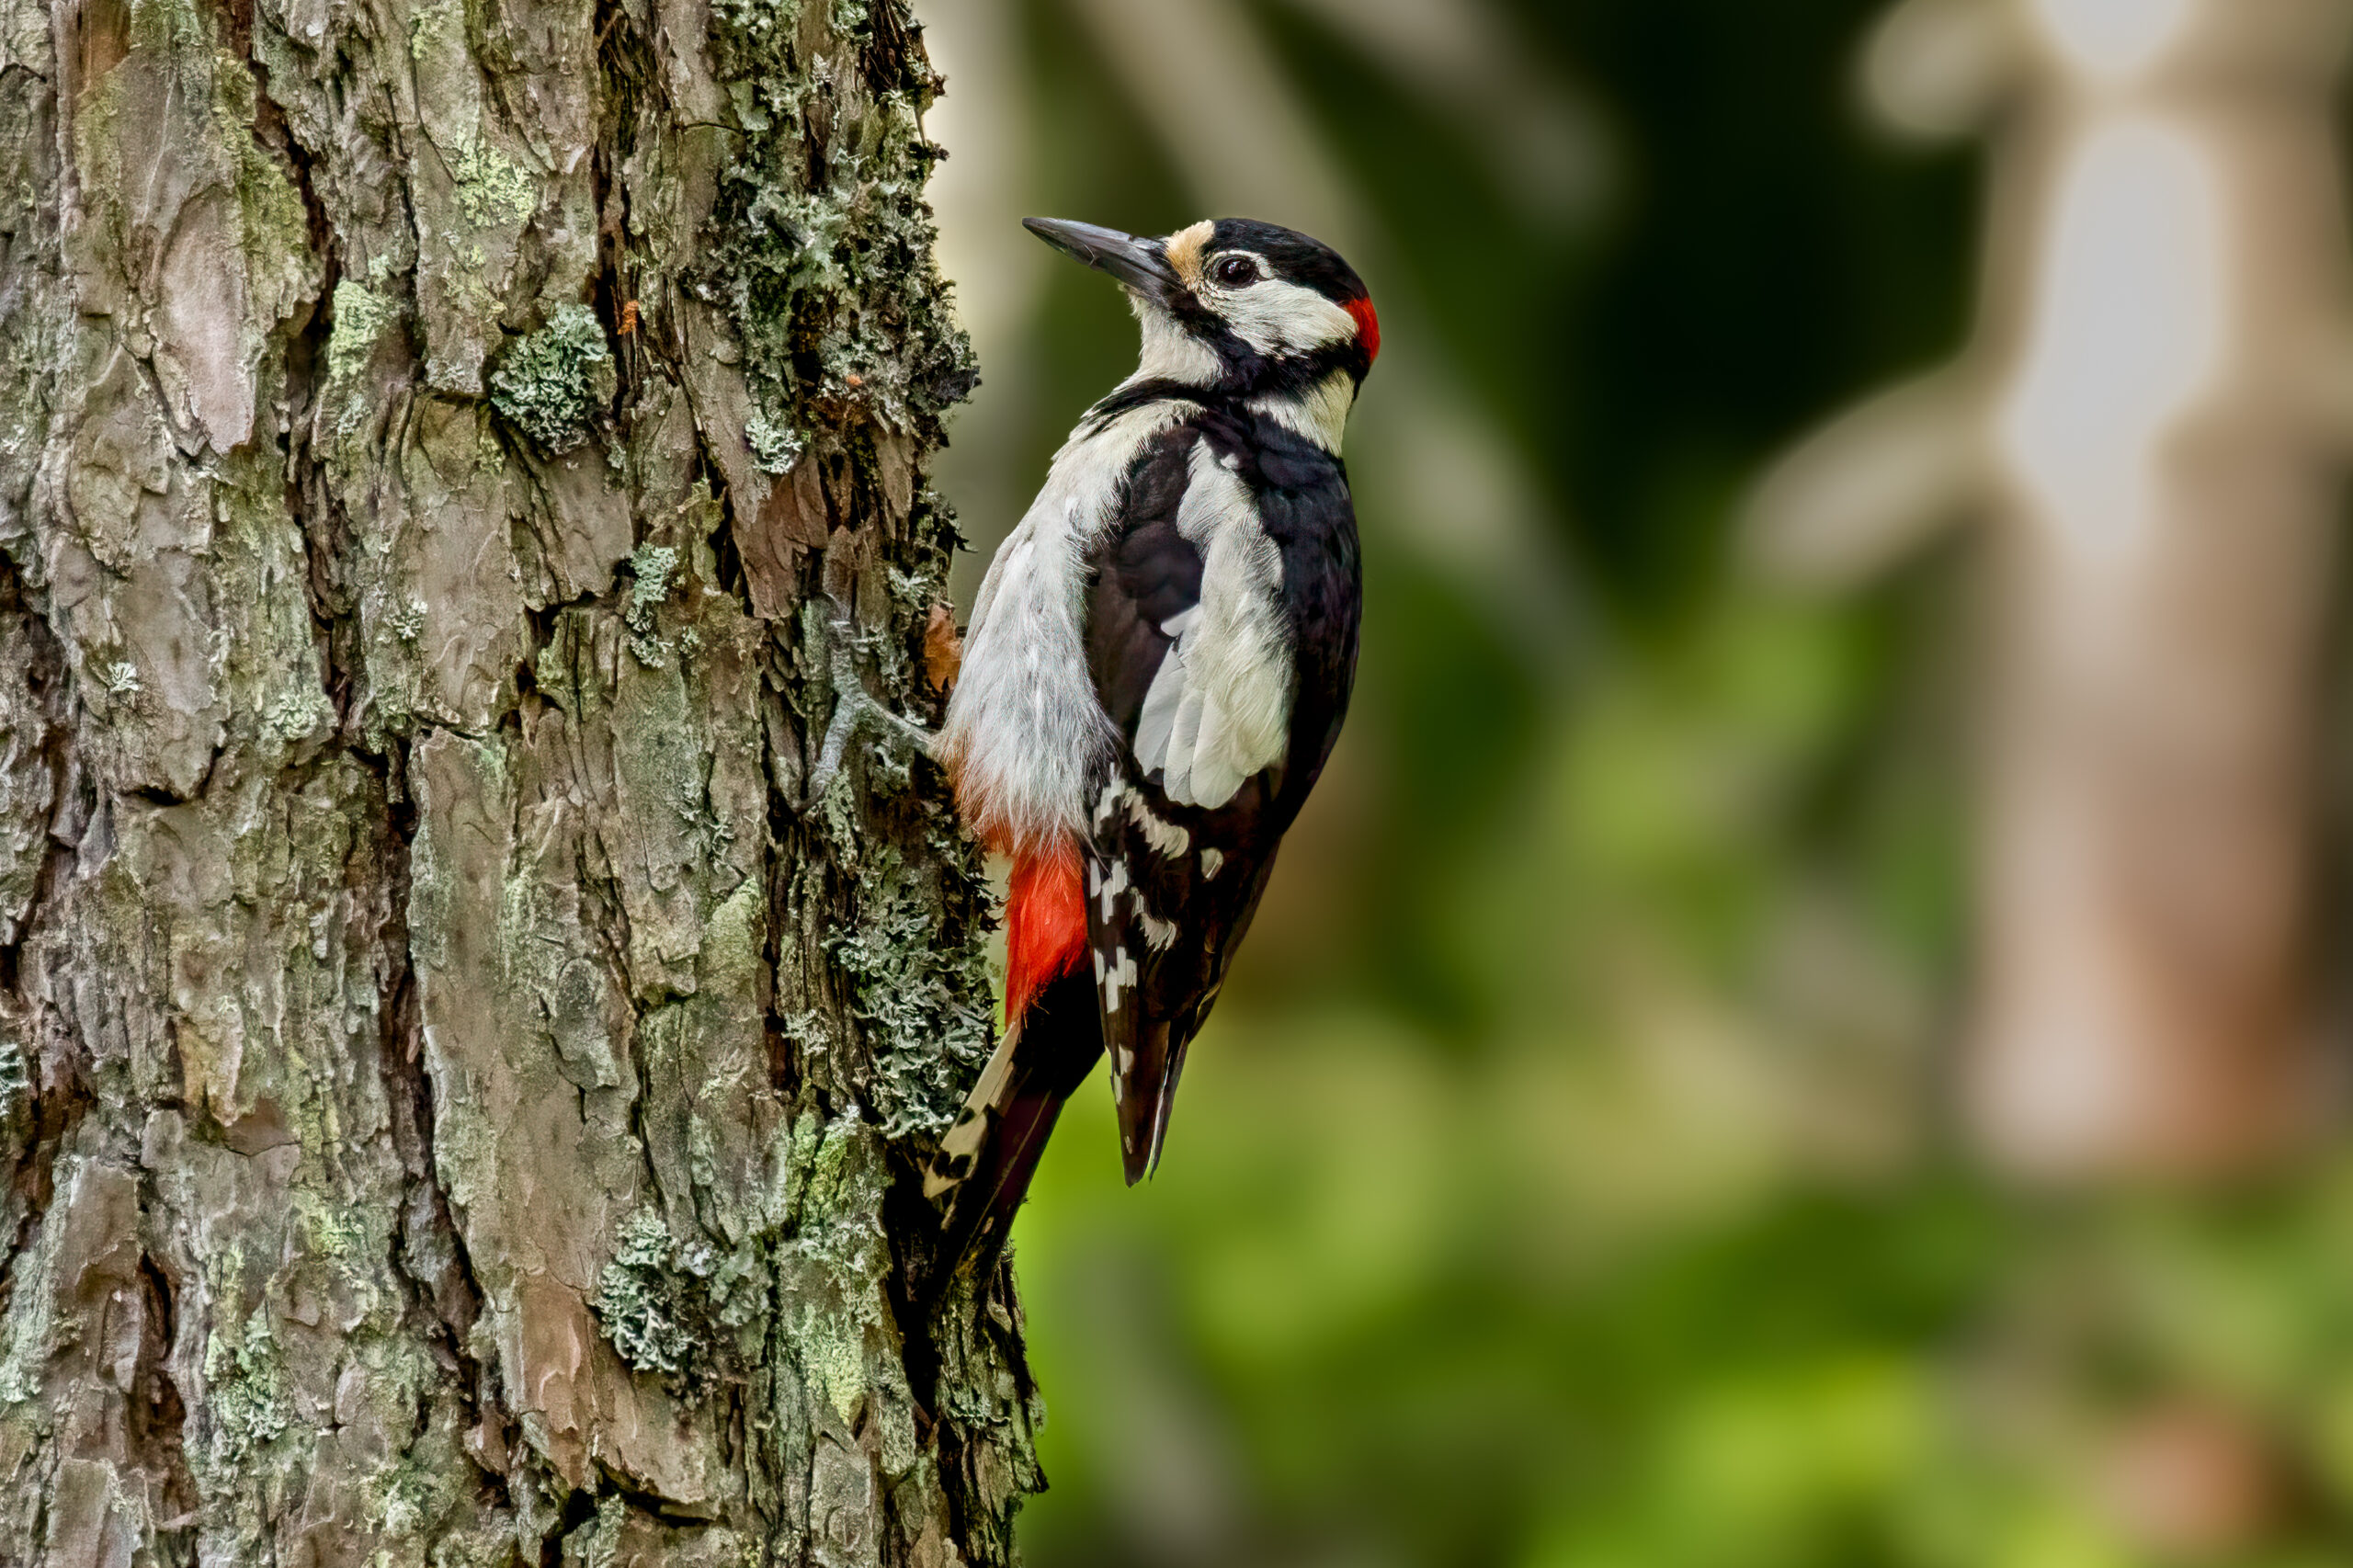 Great Spotted Woodpecker (Dendrocopos major) - Male @ Nittedal, Norway. Photo: Håvard Rosenlund